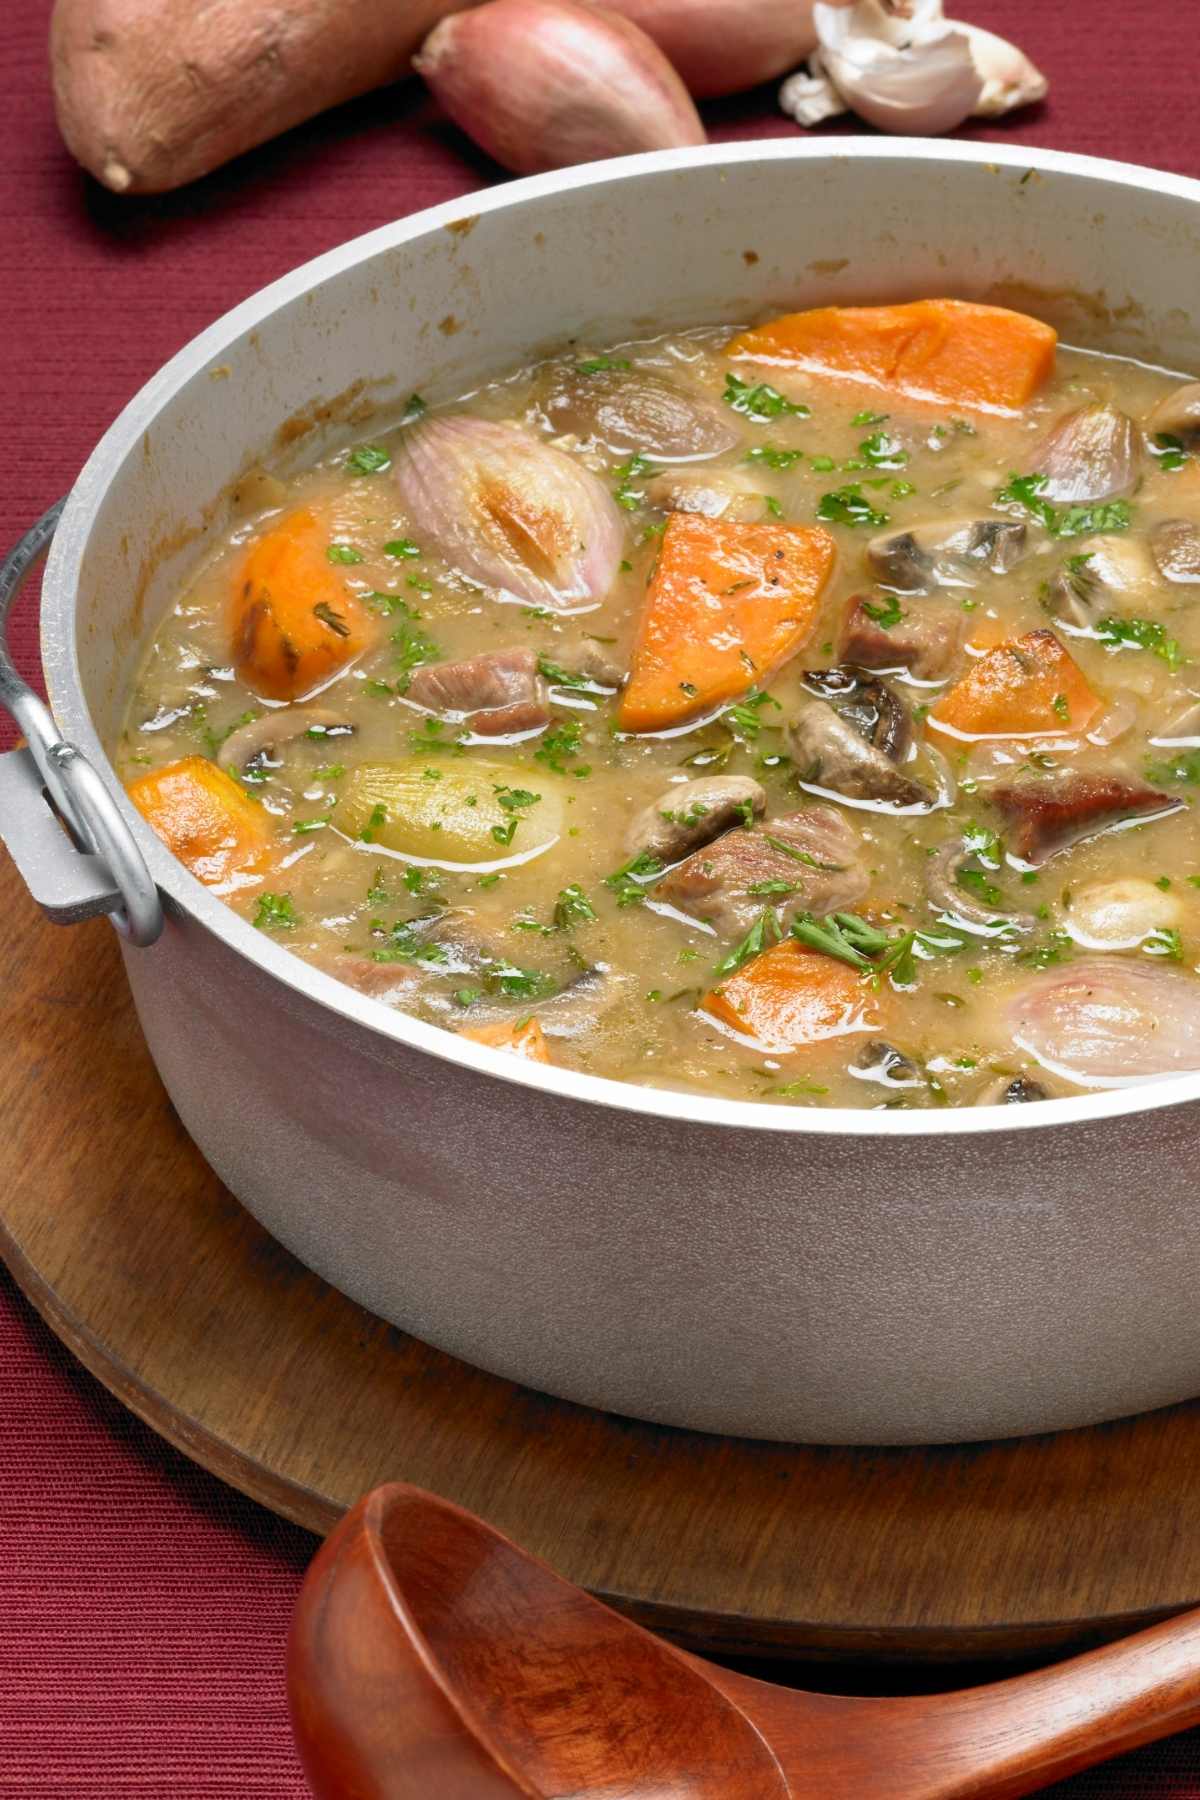 If you have some leftover roast pork from the holidays, you’ll want to make this pork soup. It’s rich and hearty enough to enjoy as a meal.